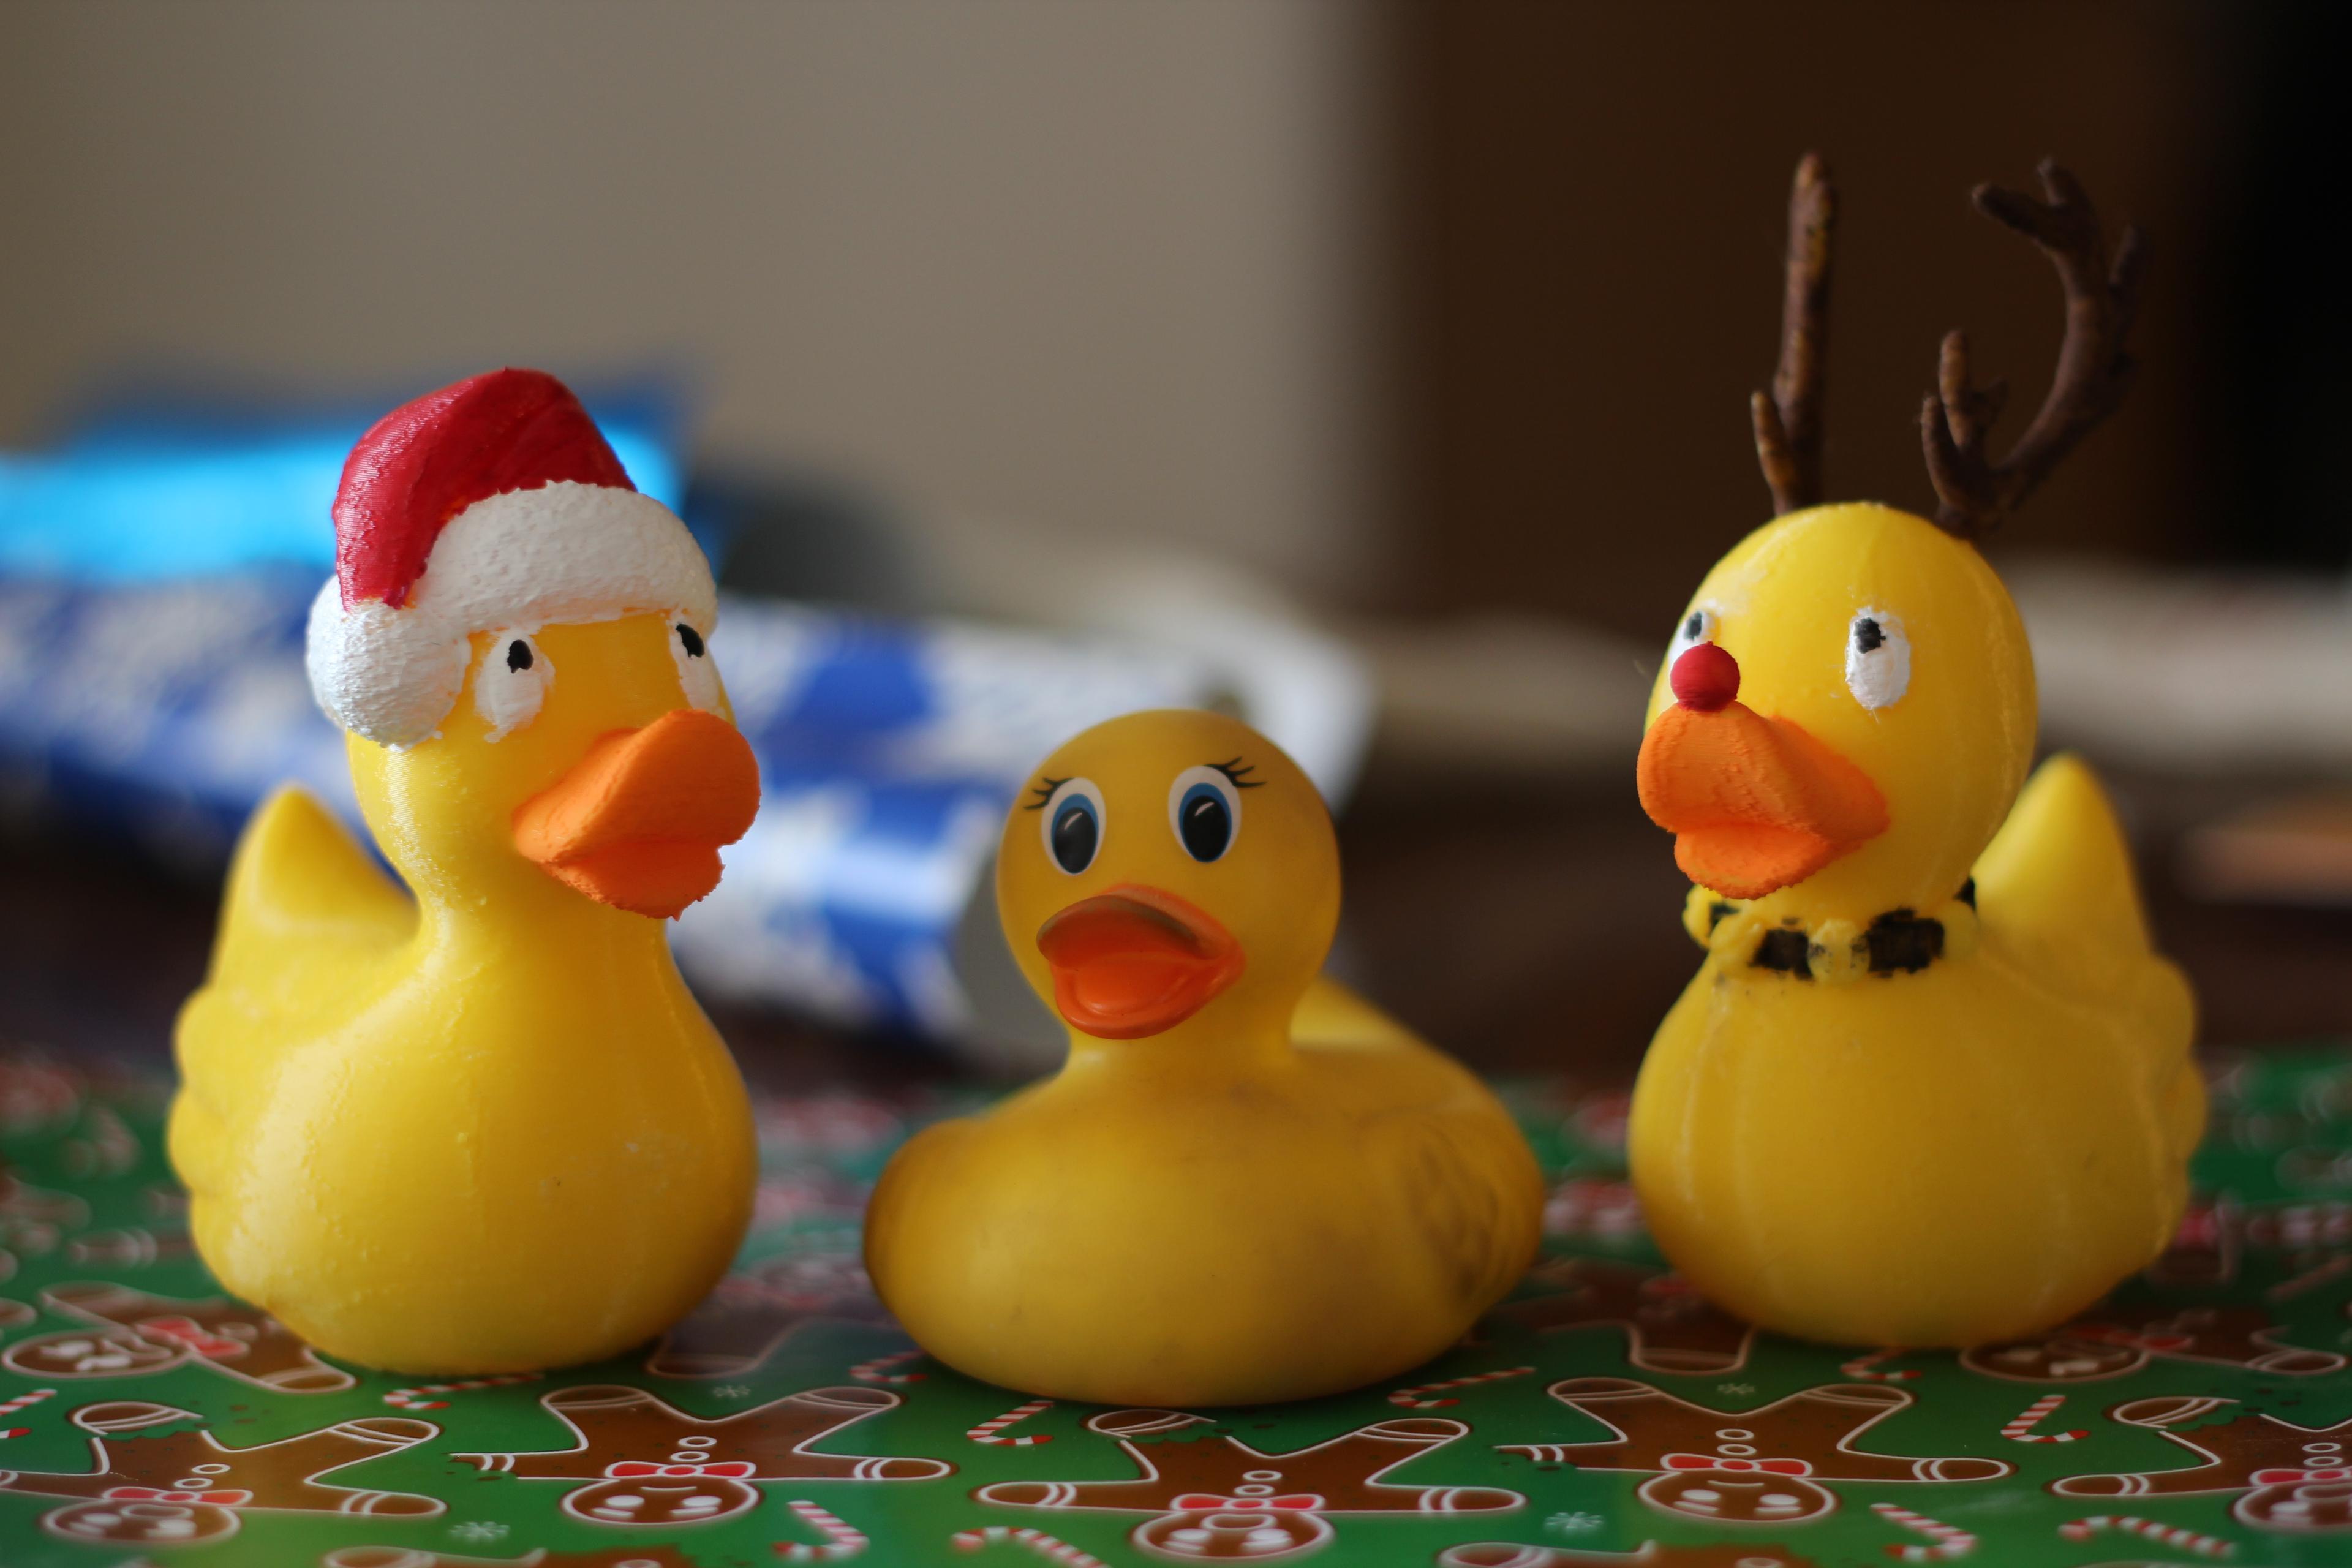 Rudolph Rubber Duckie - the one in the middle is a "real" rubber duck - 3d model